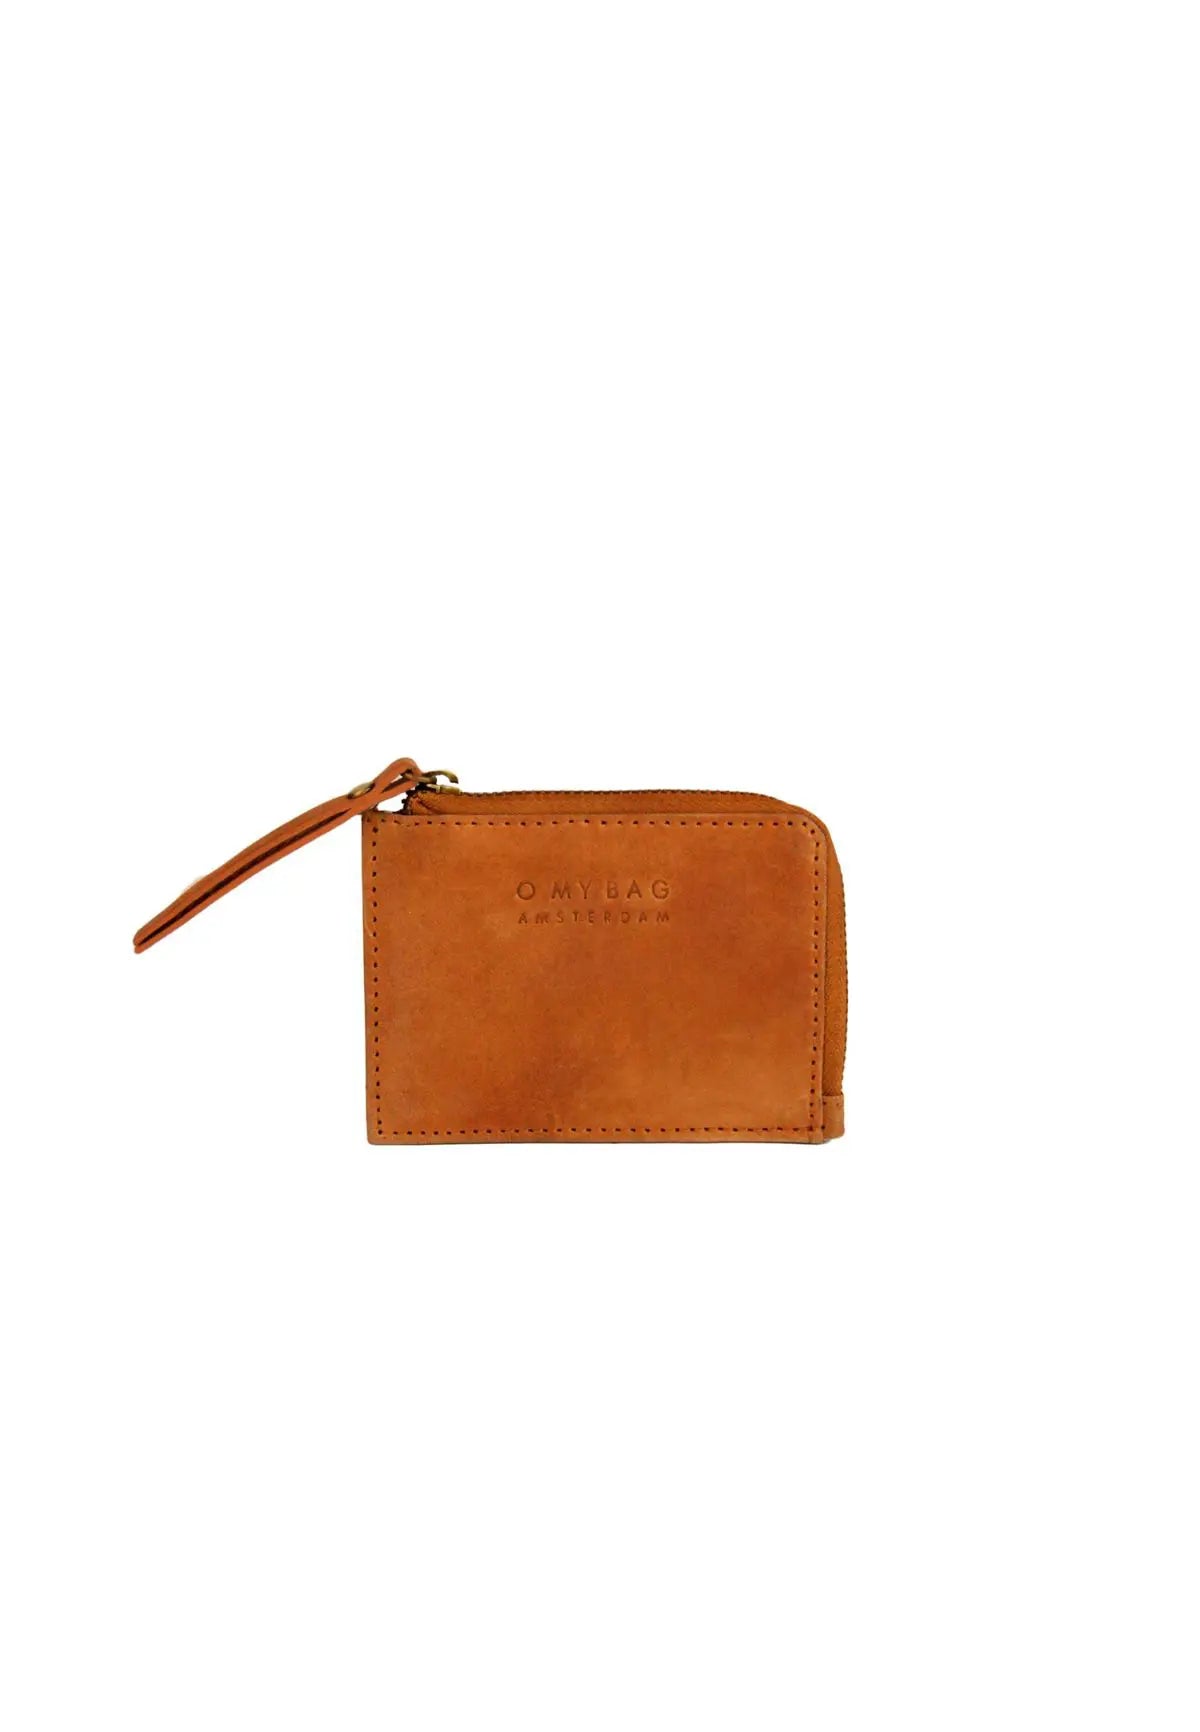 COIN PURSE CAMEL HUNTER LEATHER